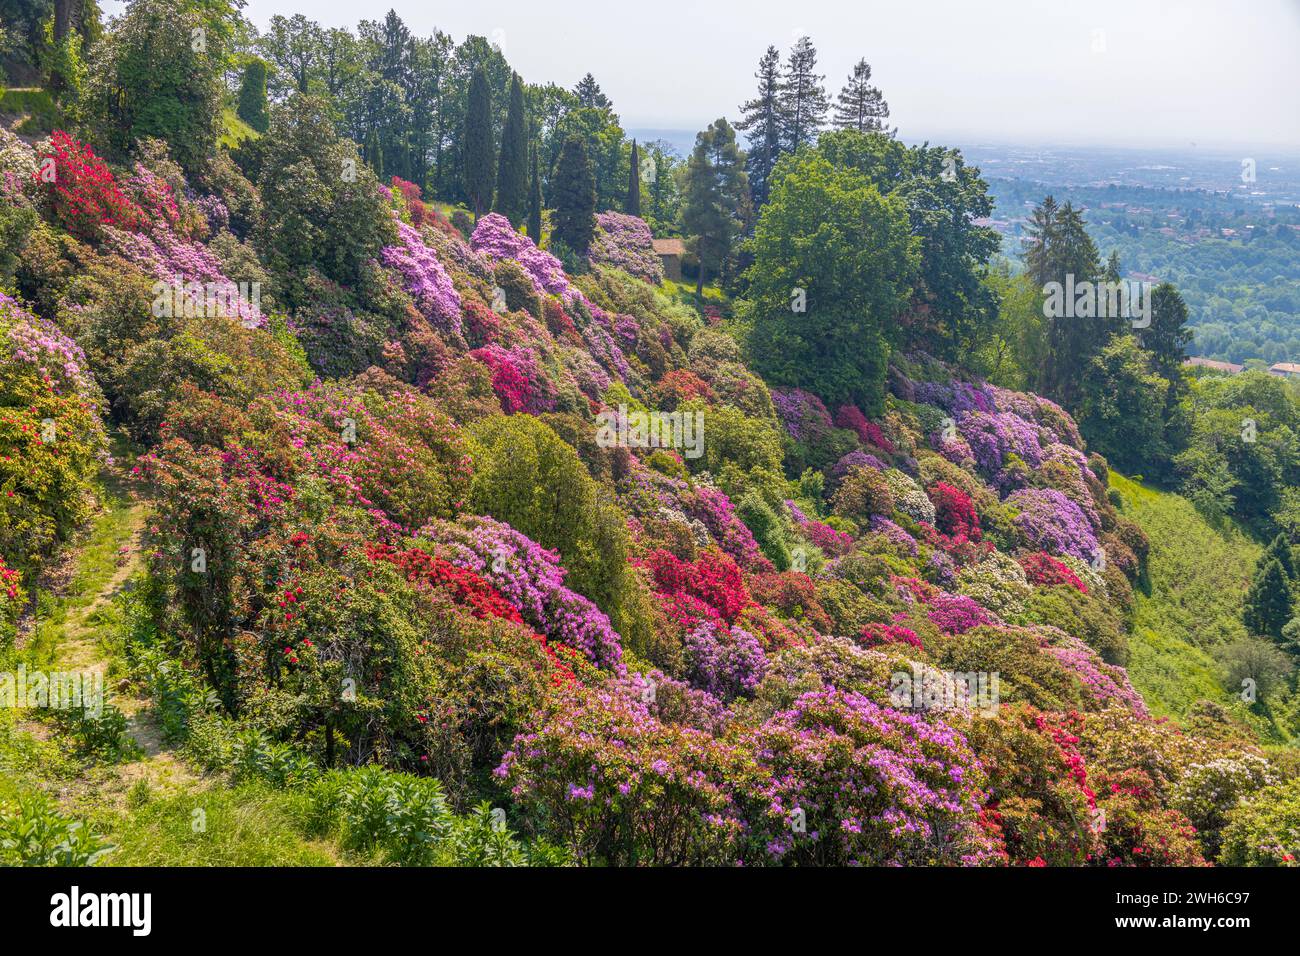 The rhododendron hill in the park of Burcina 'Felice Piacenza', province of Biella, Piedmont, Italy Stock Photo